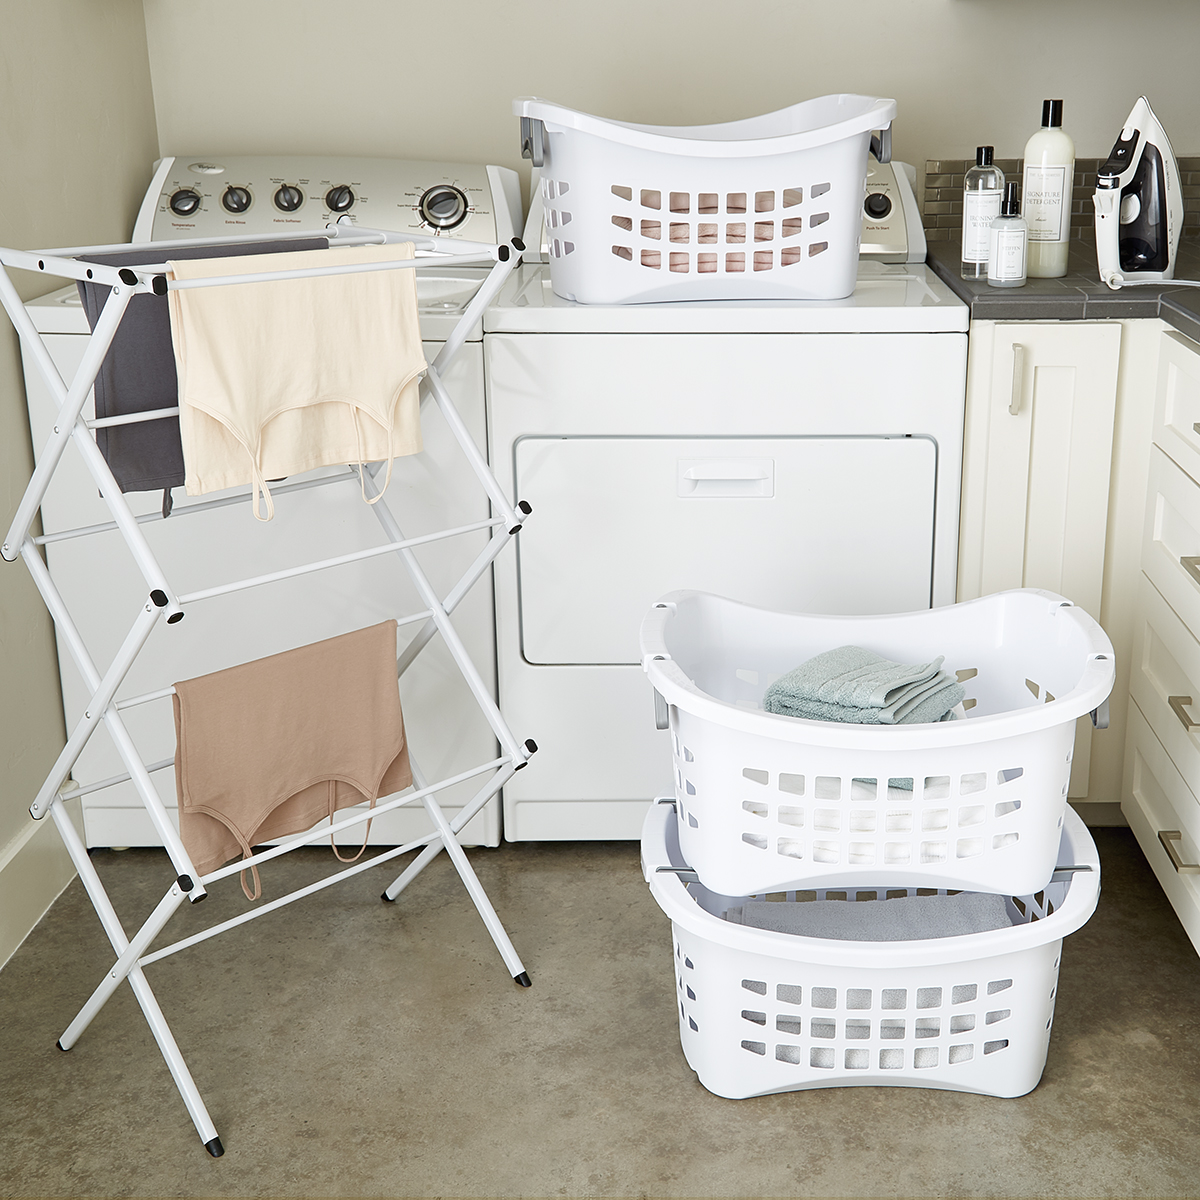 https://www.containerstore.com/catalogimages/311666/10070683-Laundry-Ironing-Started-Kit.jpg